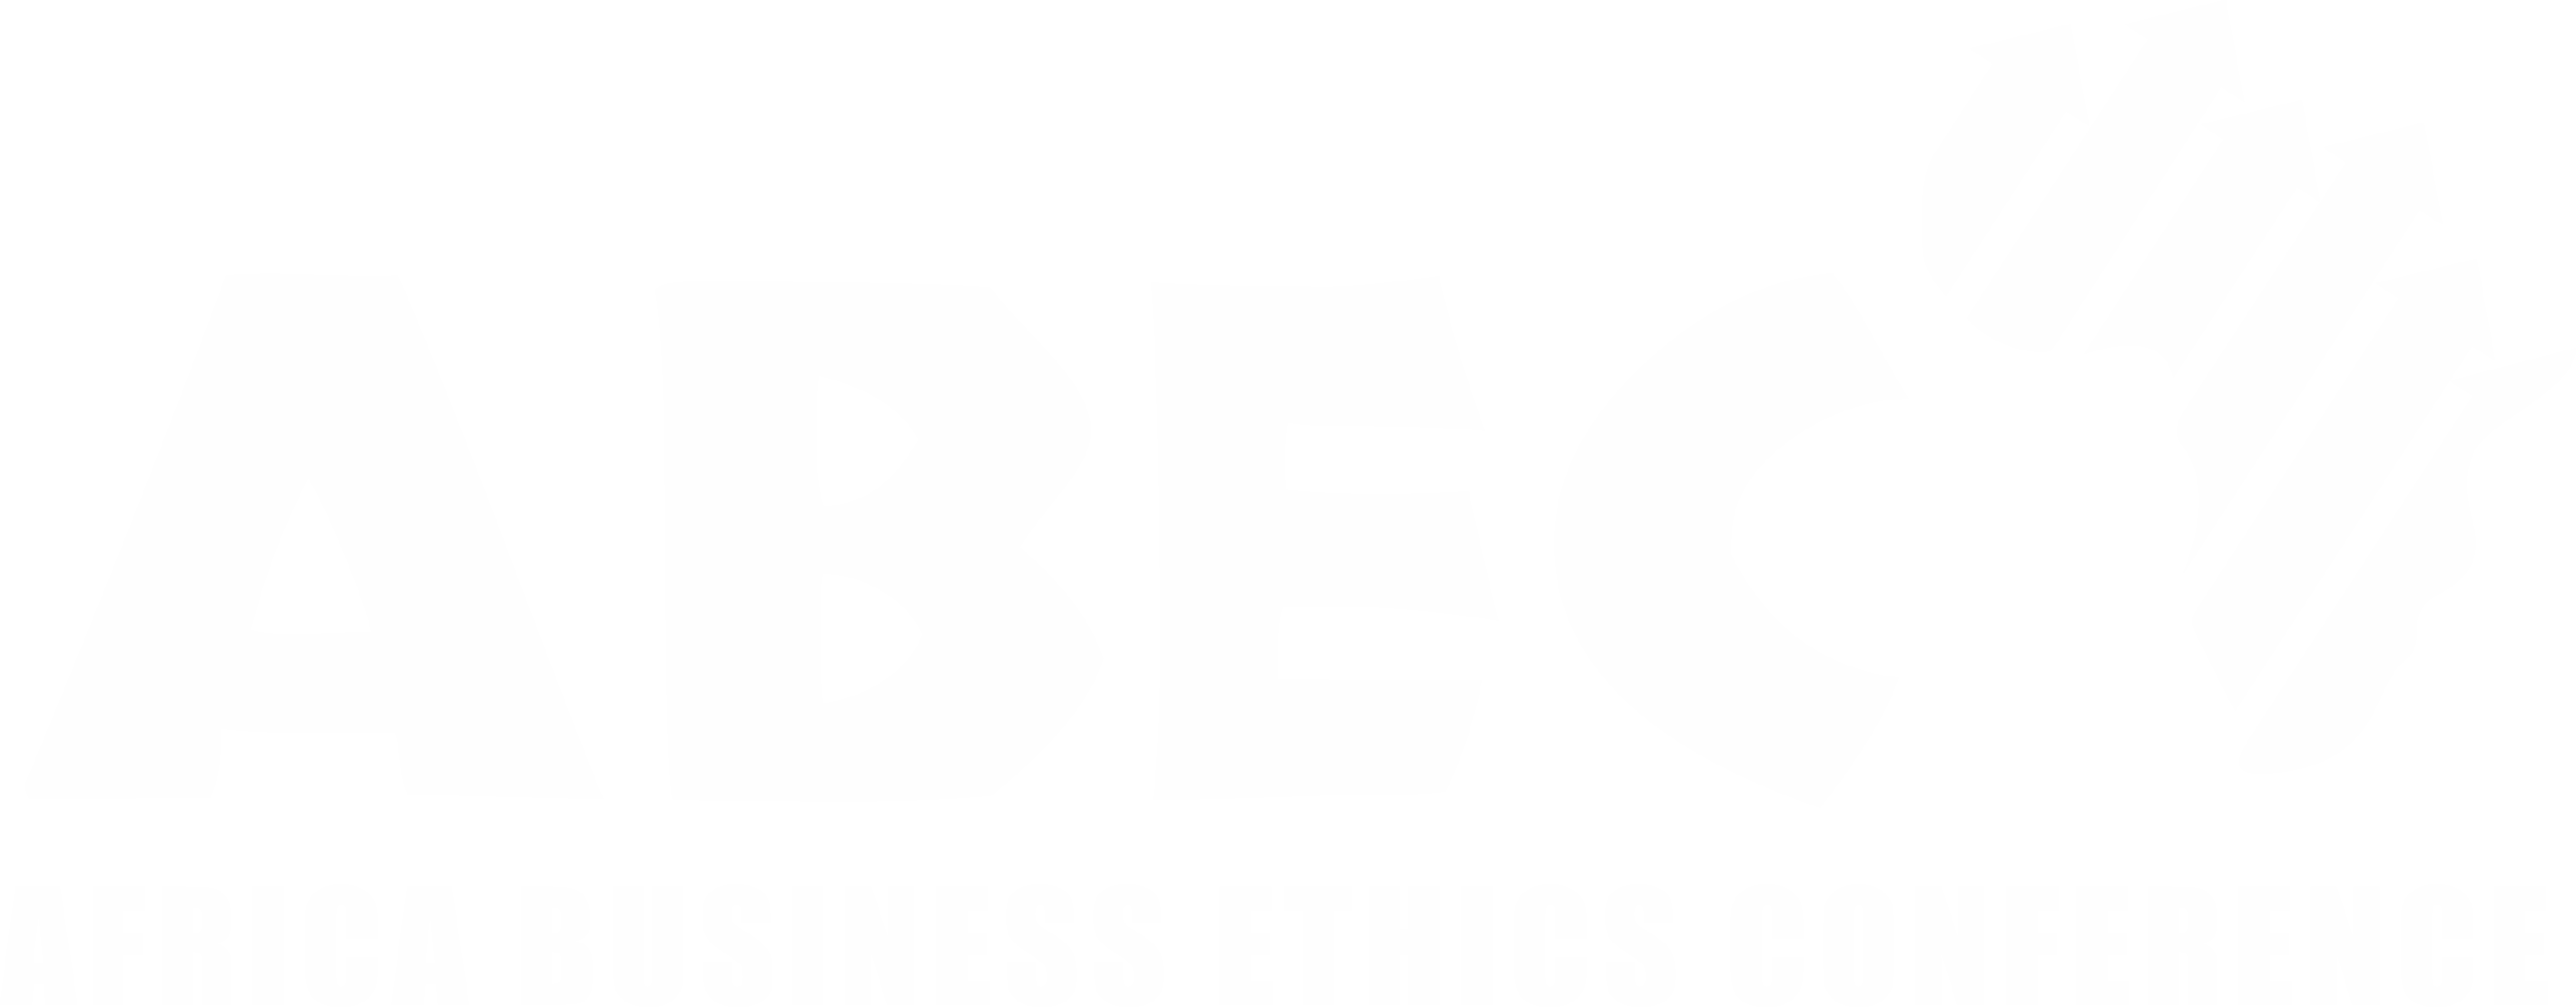 Africa Business Ethics Conference